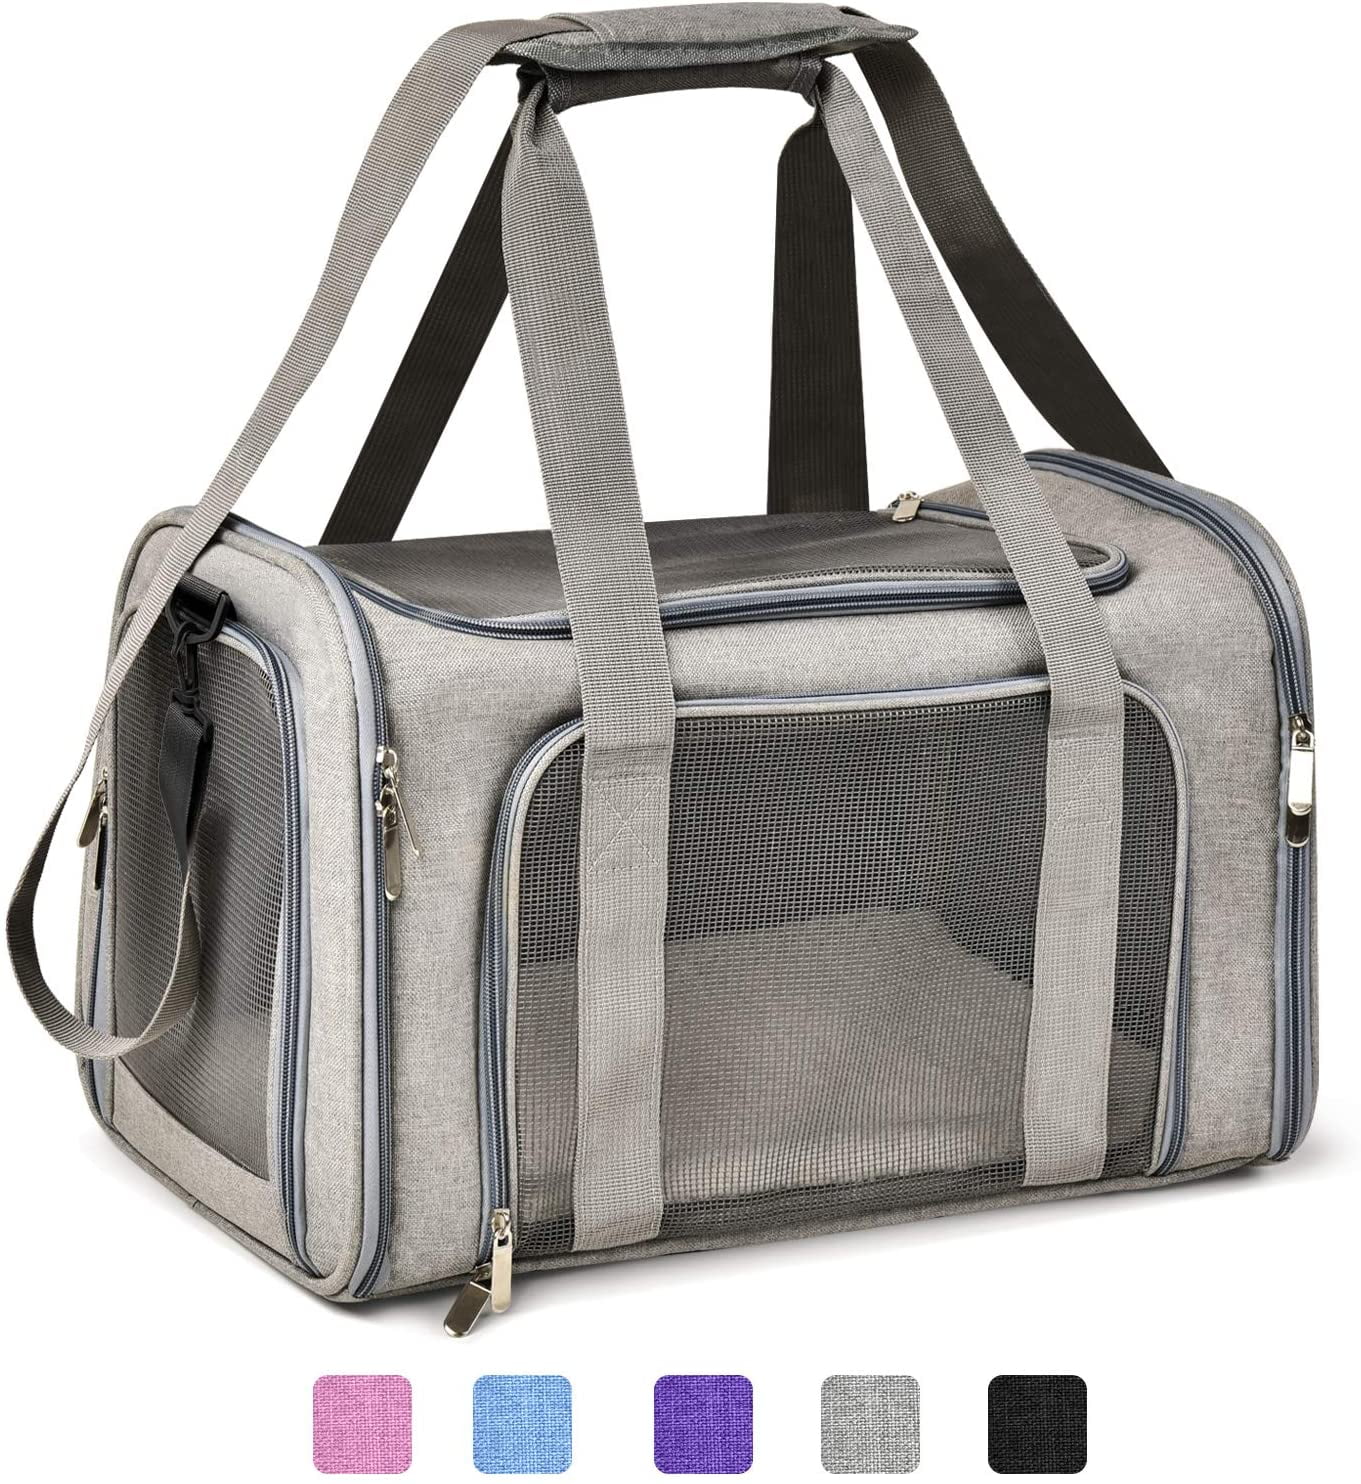 A4Pet Small Dog Carrier for Air Travel, Airline Approved Cat Carrier for  Under 18 lbs Small Pet, Soft-Sided Pet Travel Carrier Bag - Gray, 16.9 x  10.2